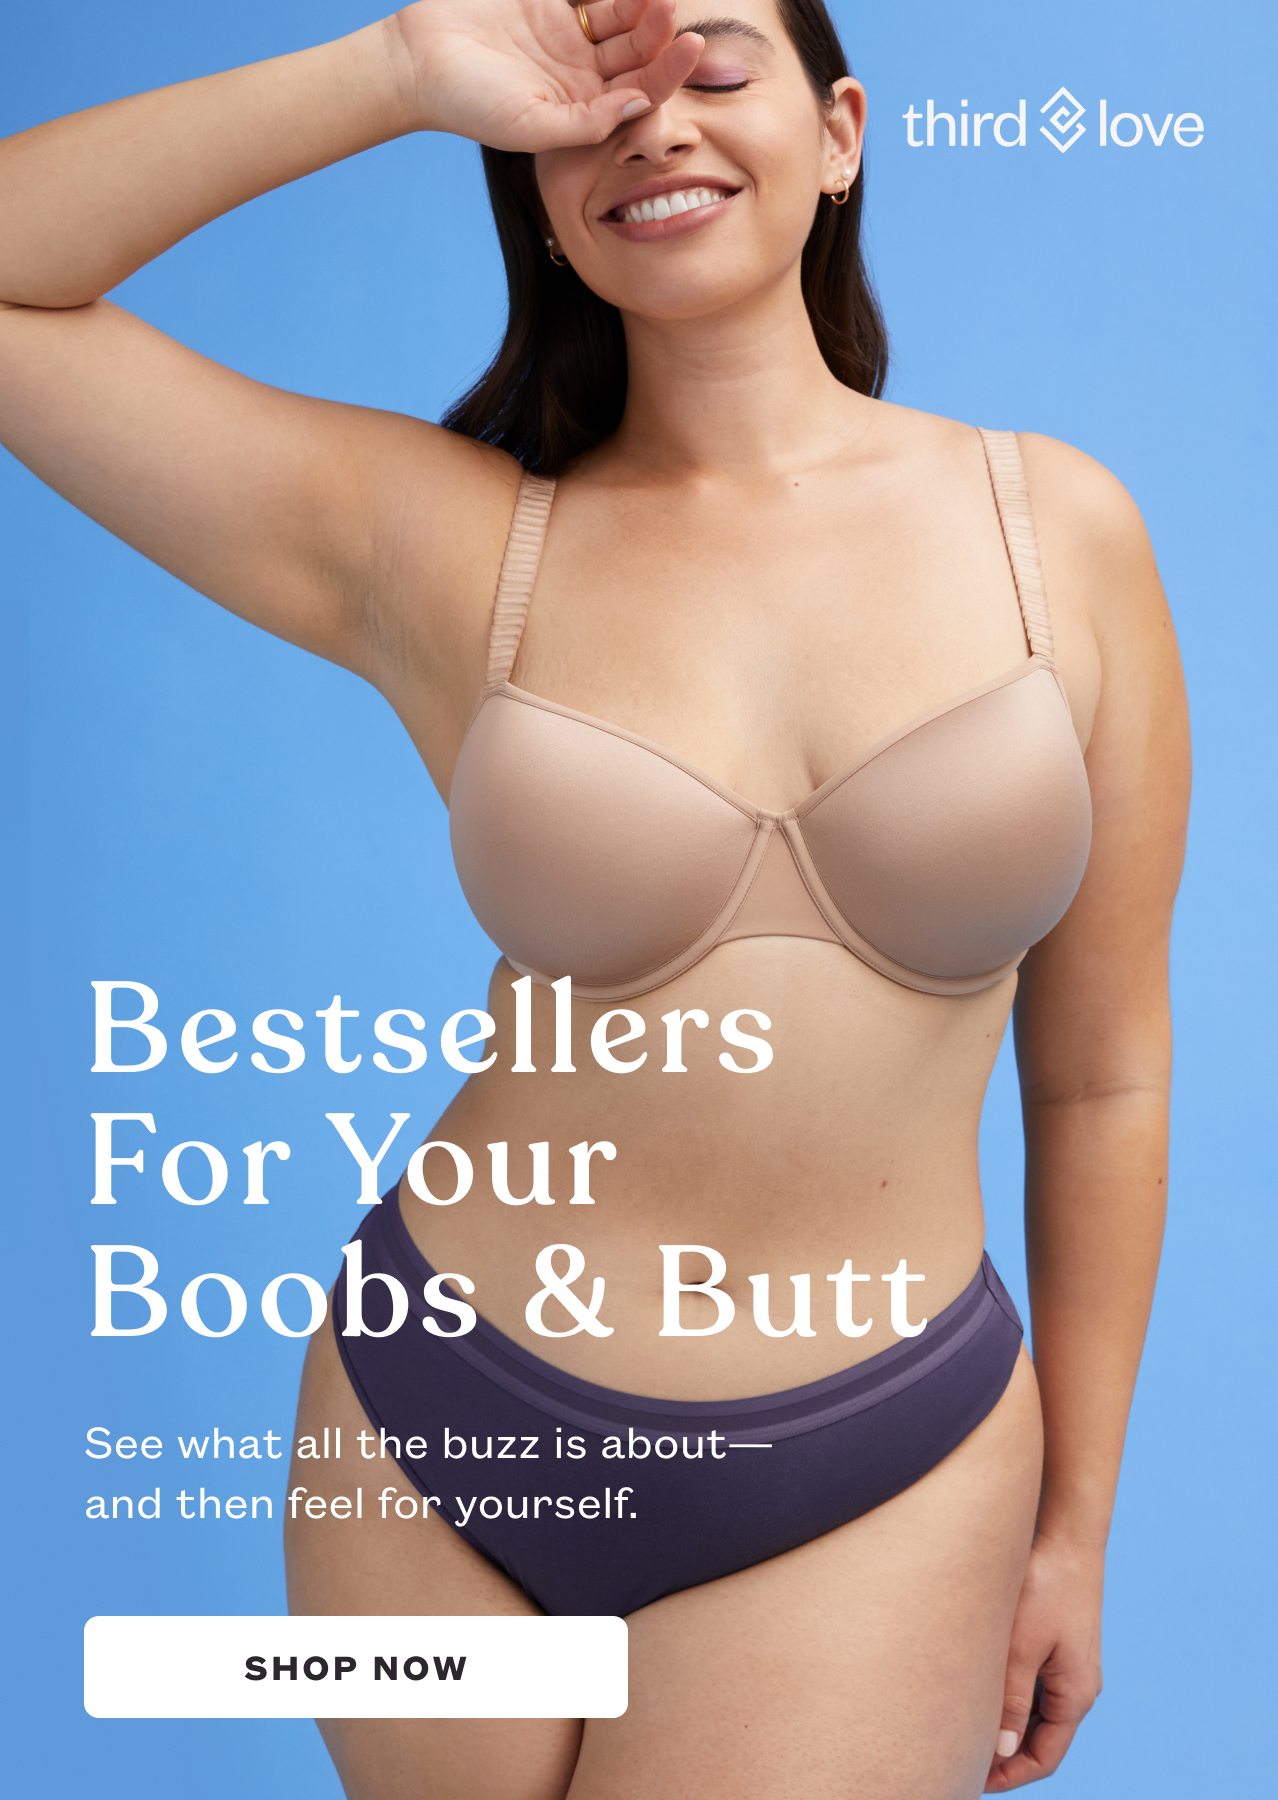 Bestsellers For Your Boobs & Butt